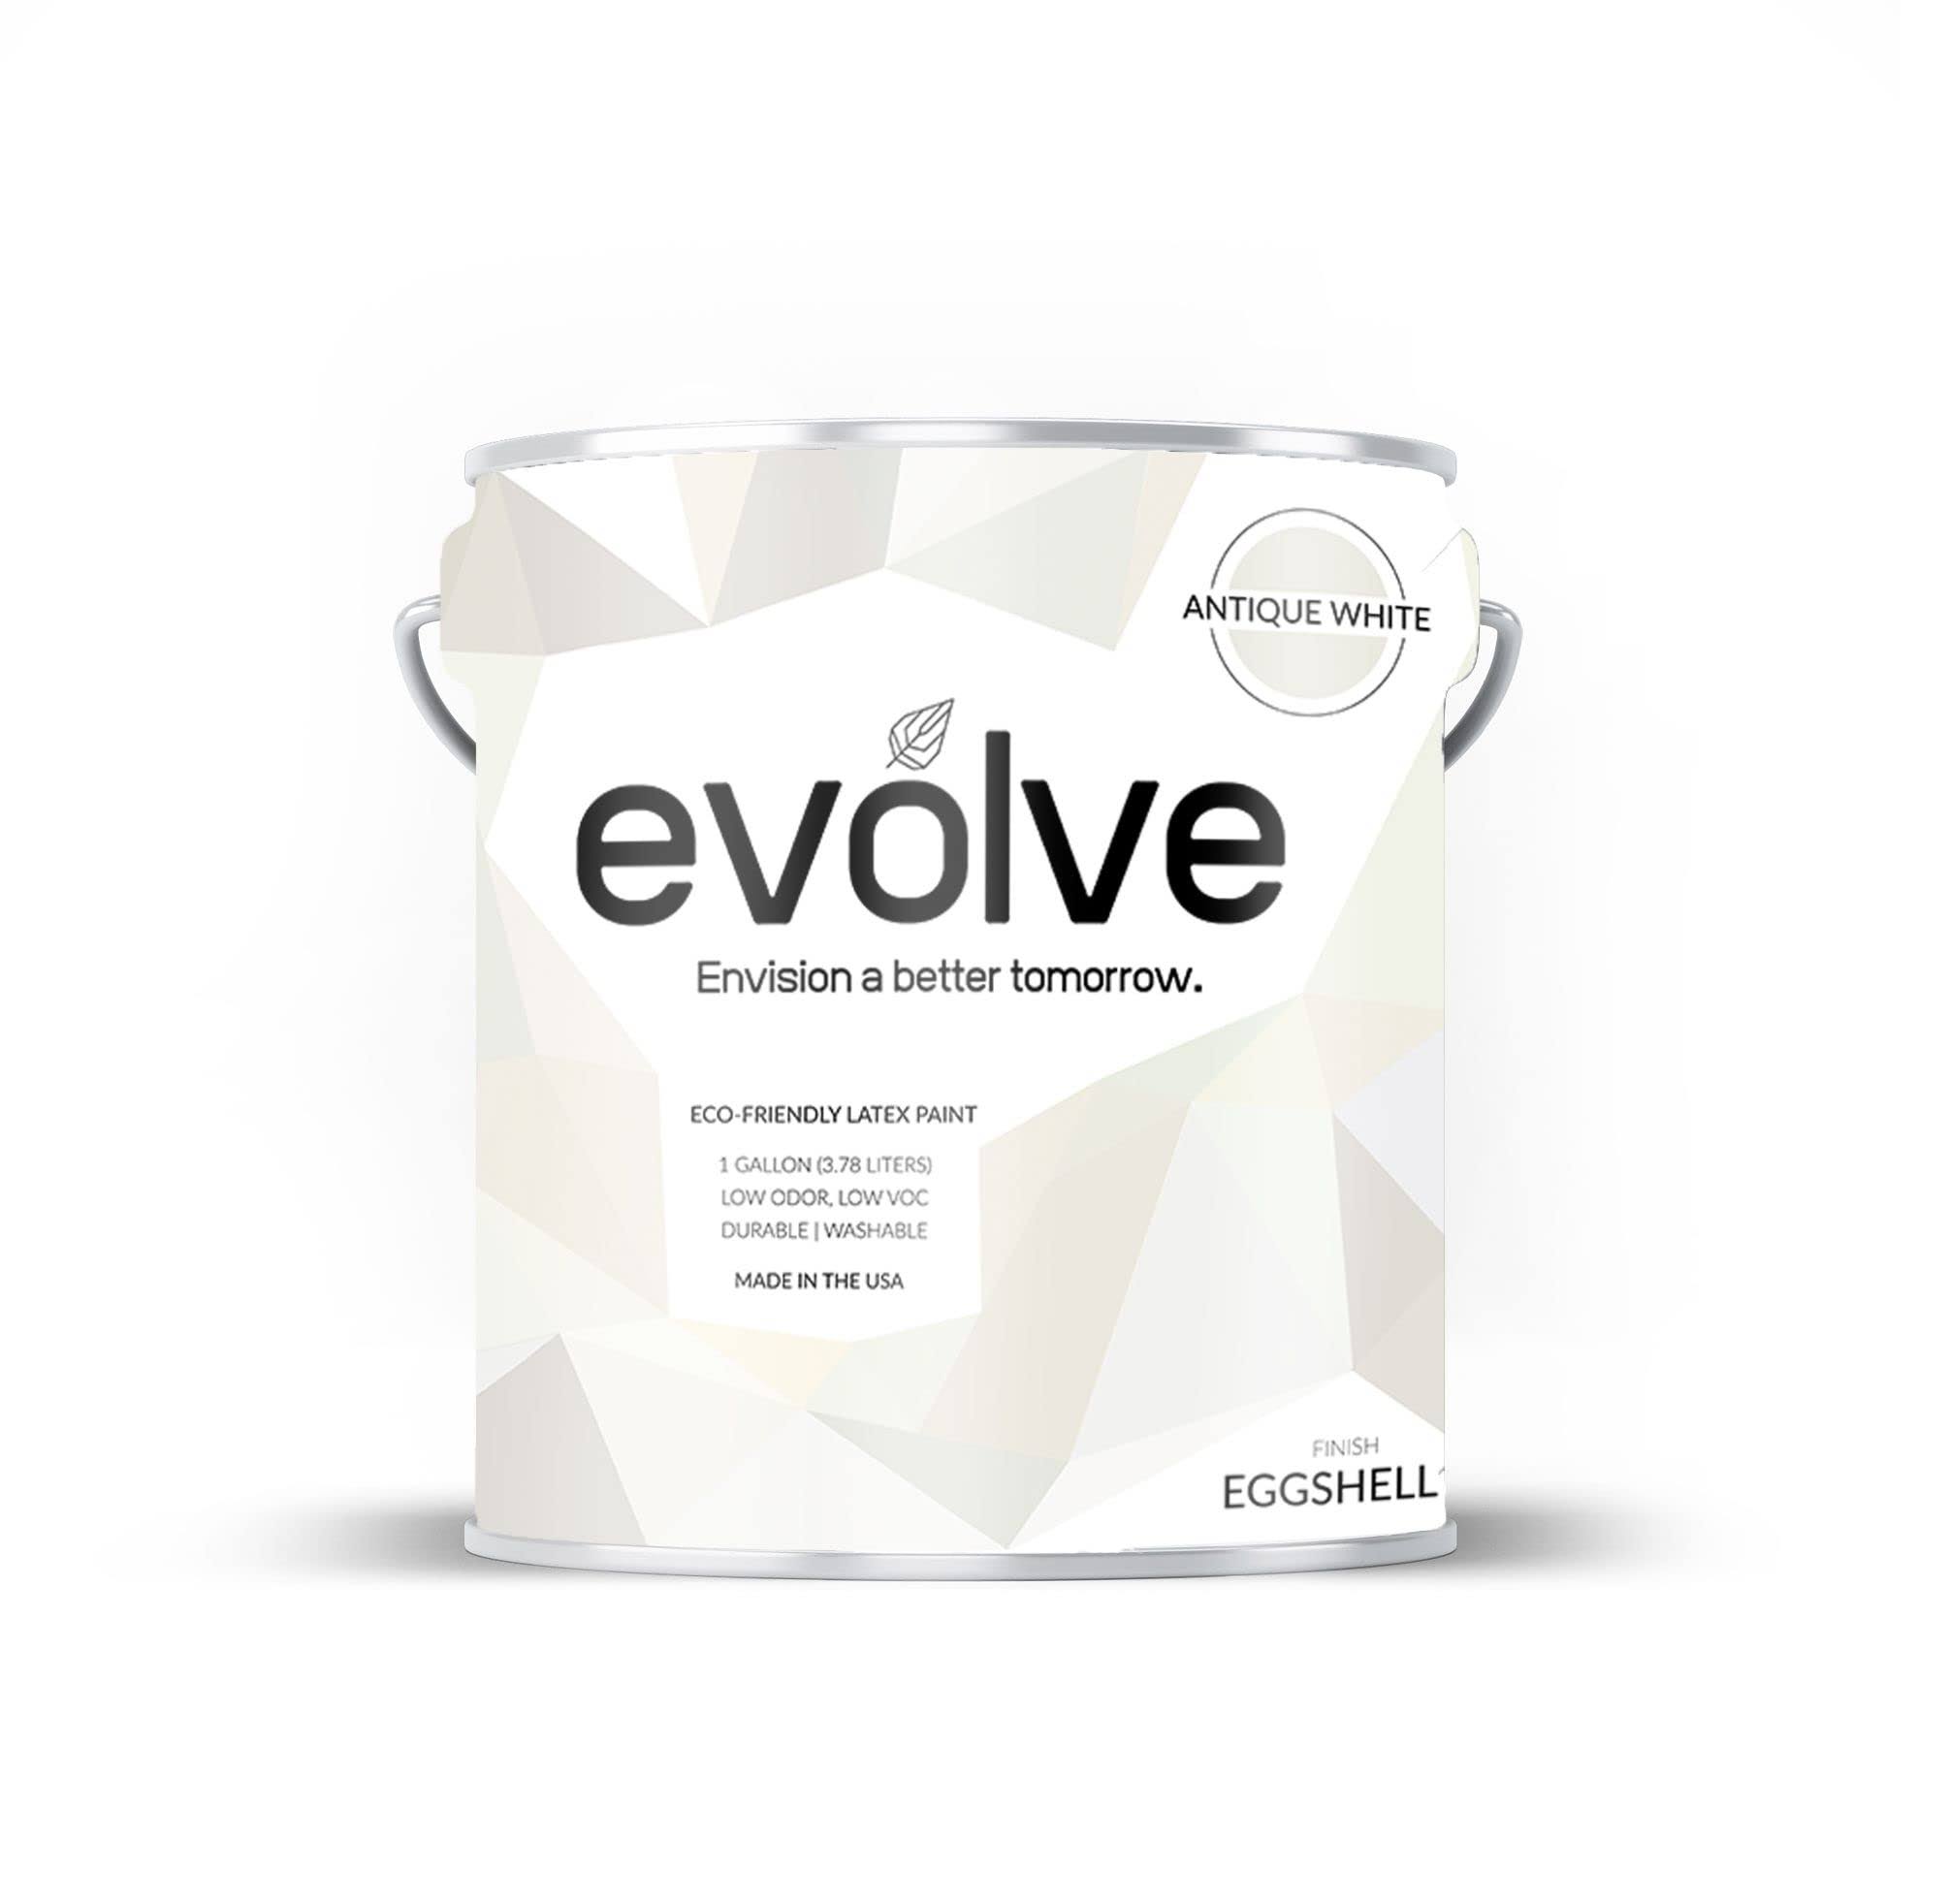 Evolve Paint & Primer: Environment-friendly, Low Sheen with One-Coat Coverage for Interior & Exterior Surfaces (Antique White, 1-Gallon)